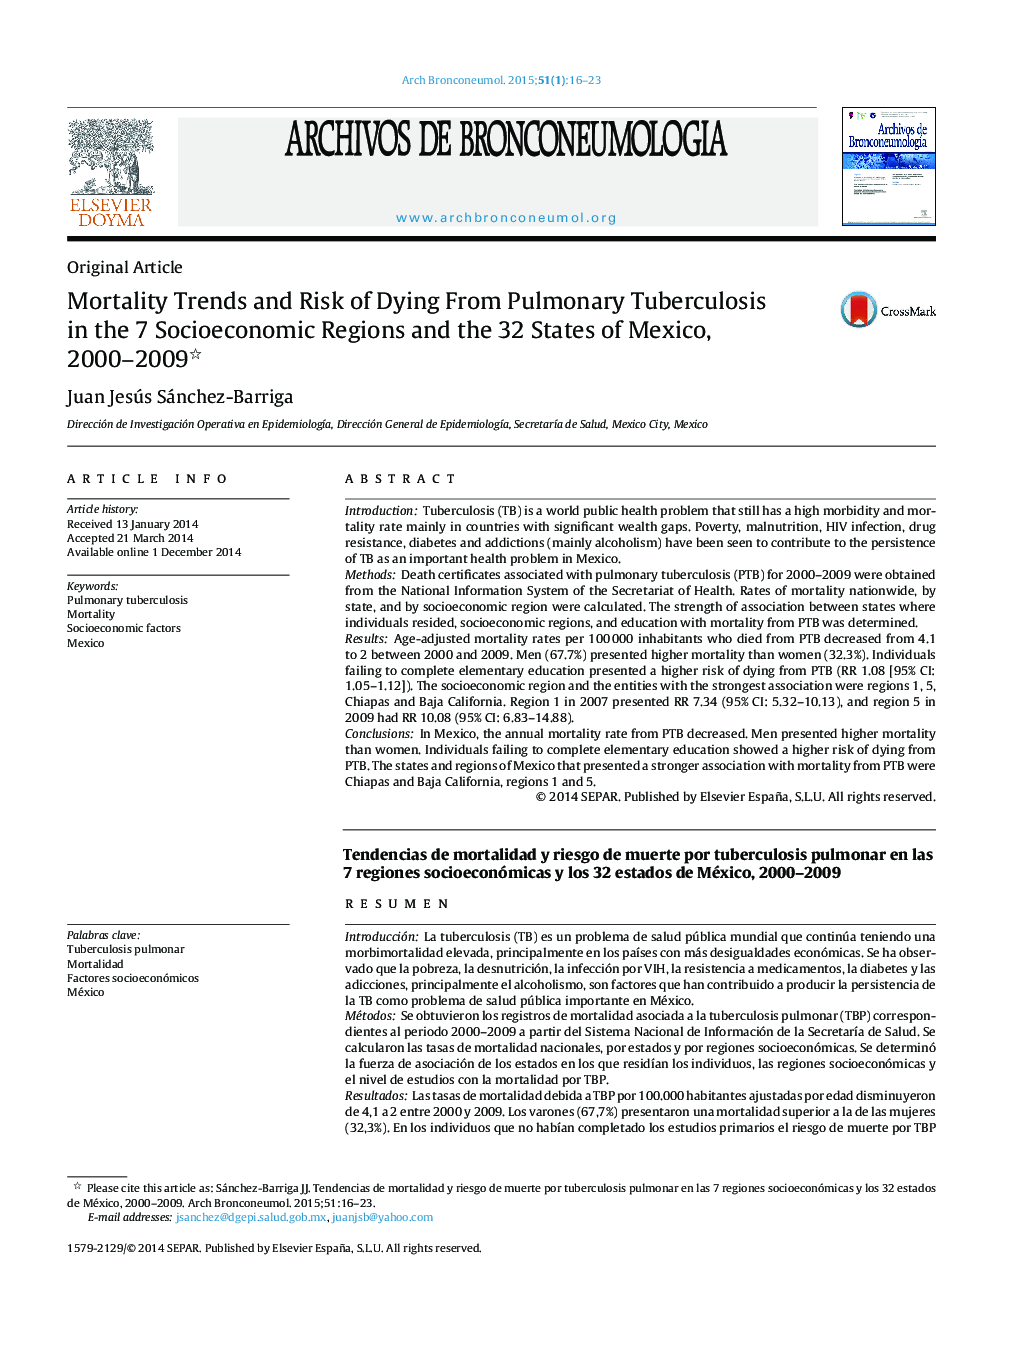 Mortality Trends and Risk of Dying From Pulmonary Tuberculosis in the 7 Socioeconomic Regions and the 32 States of Mexico, 2000–2009 